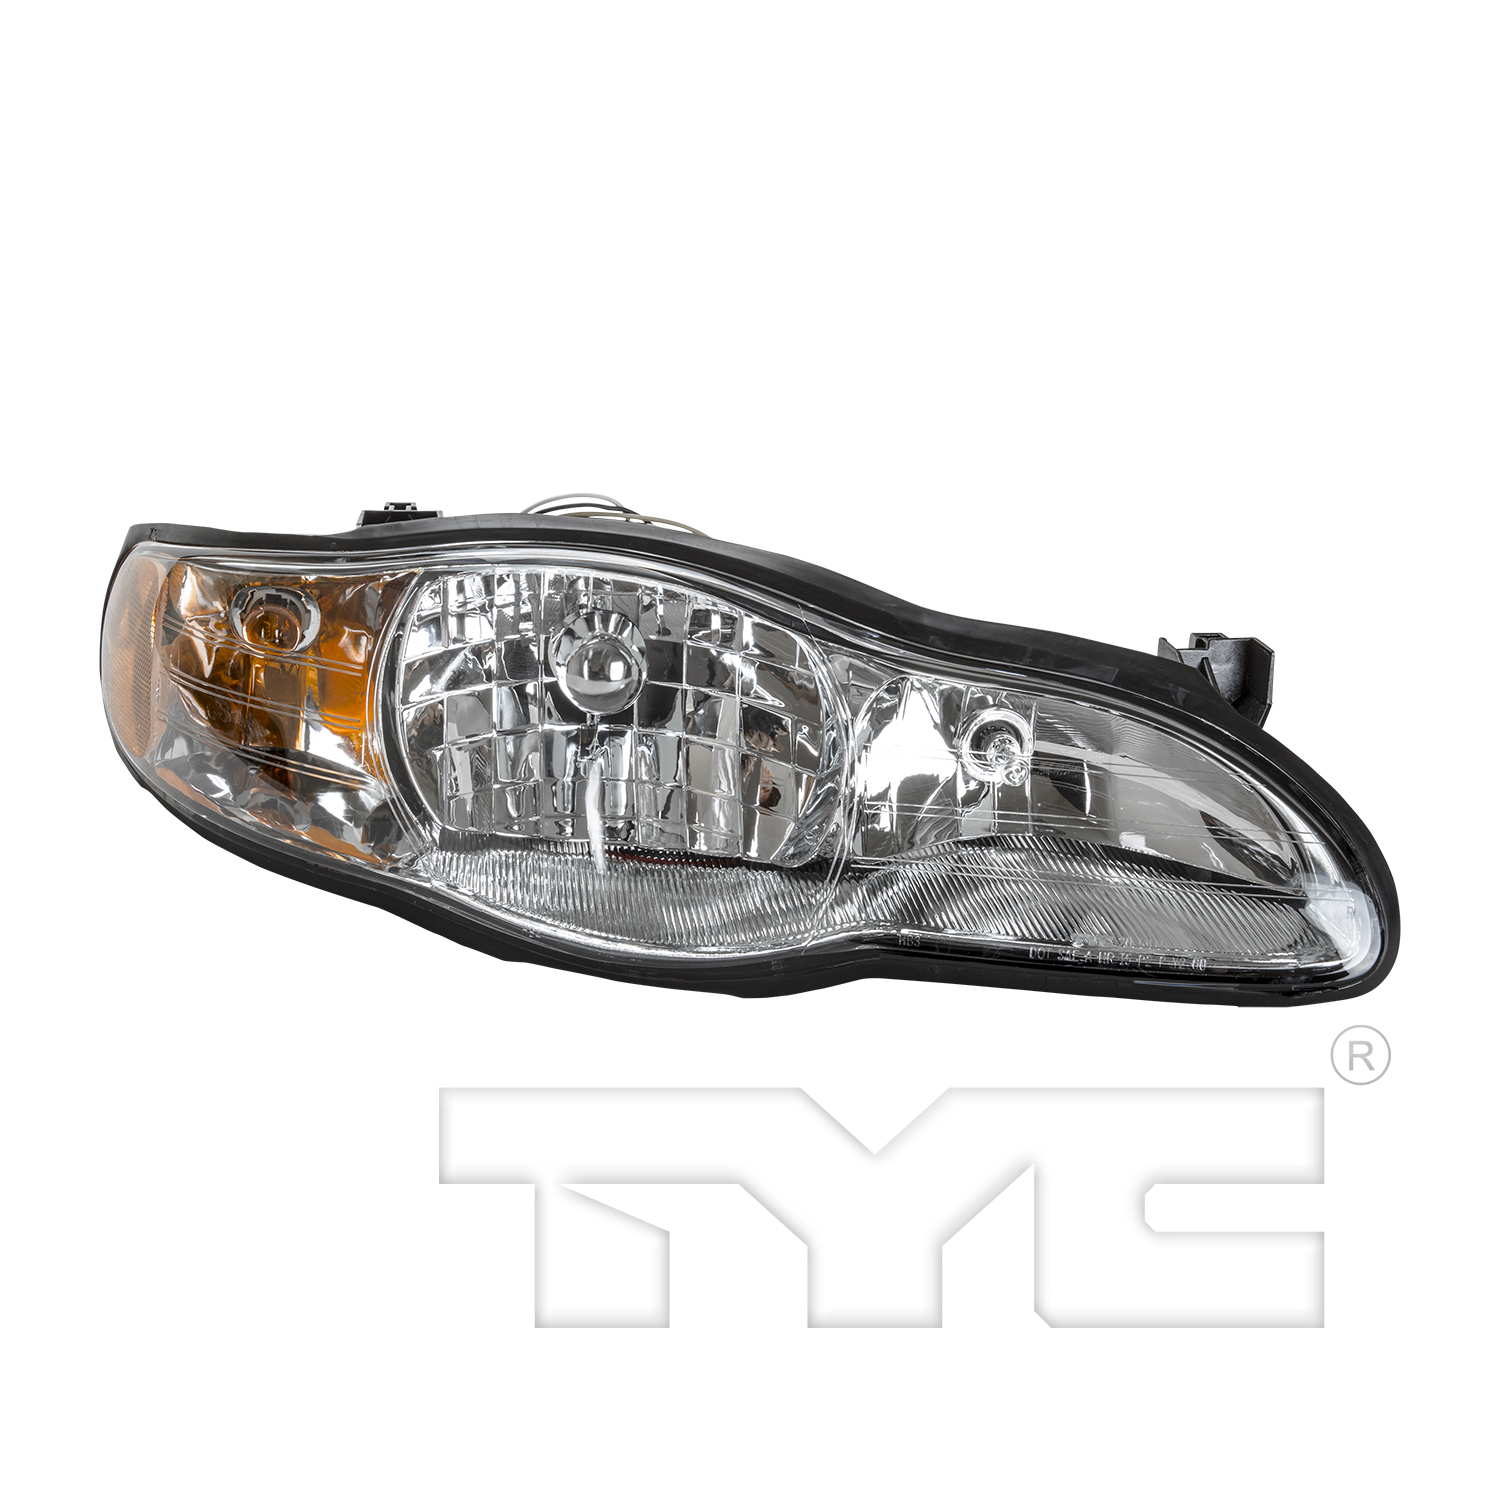 Aftermarket HEADLIGHTS for CHEVROLET - MONTE CARLO, MONTE CARLO,00-05,RT Headlamp assy composite